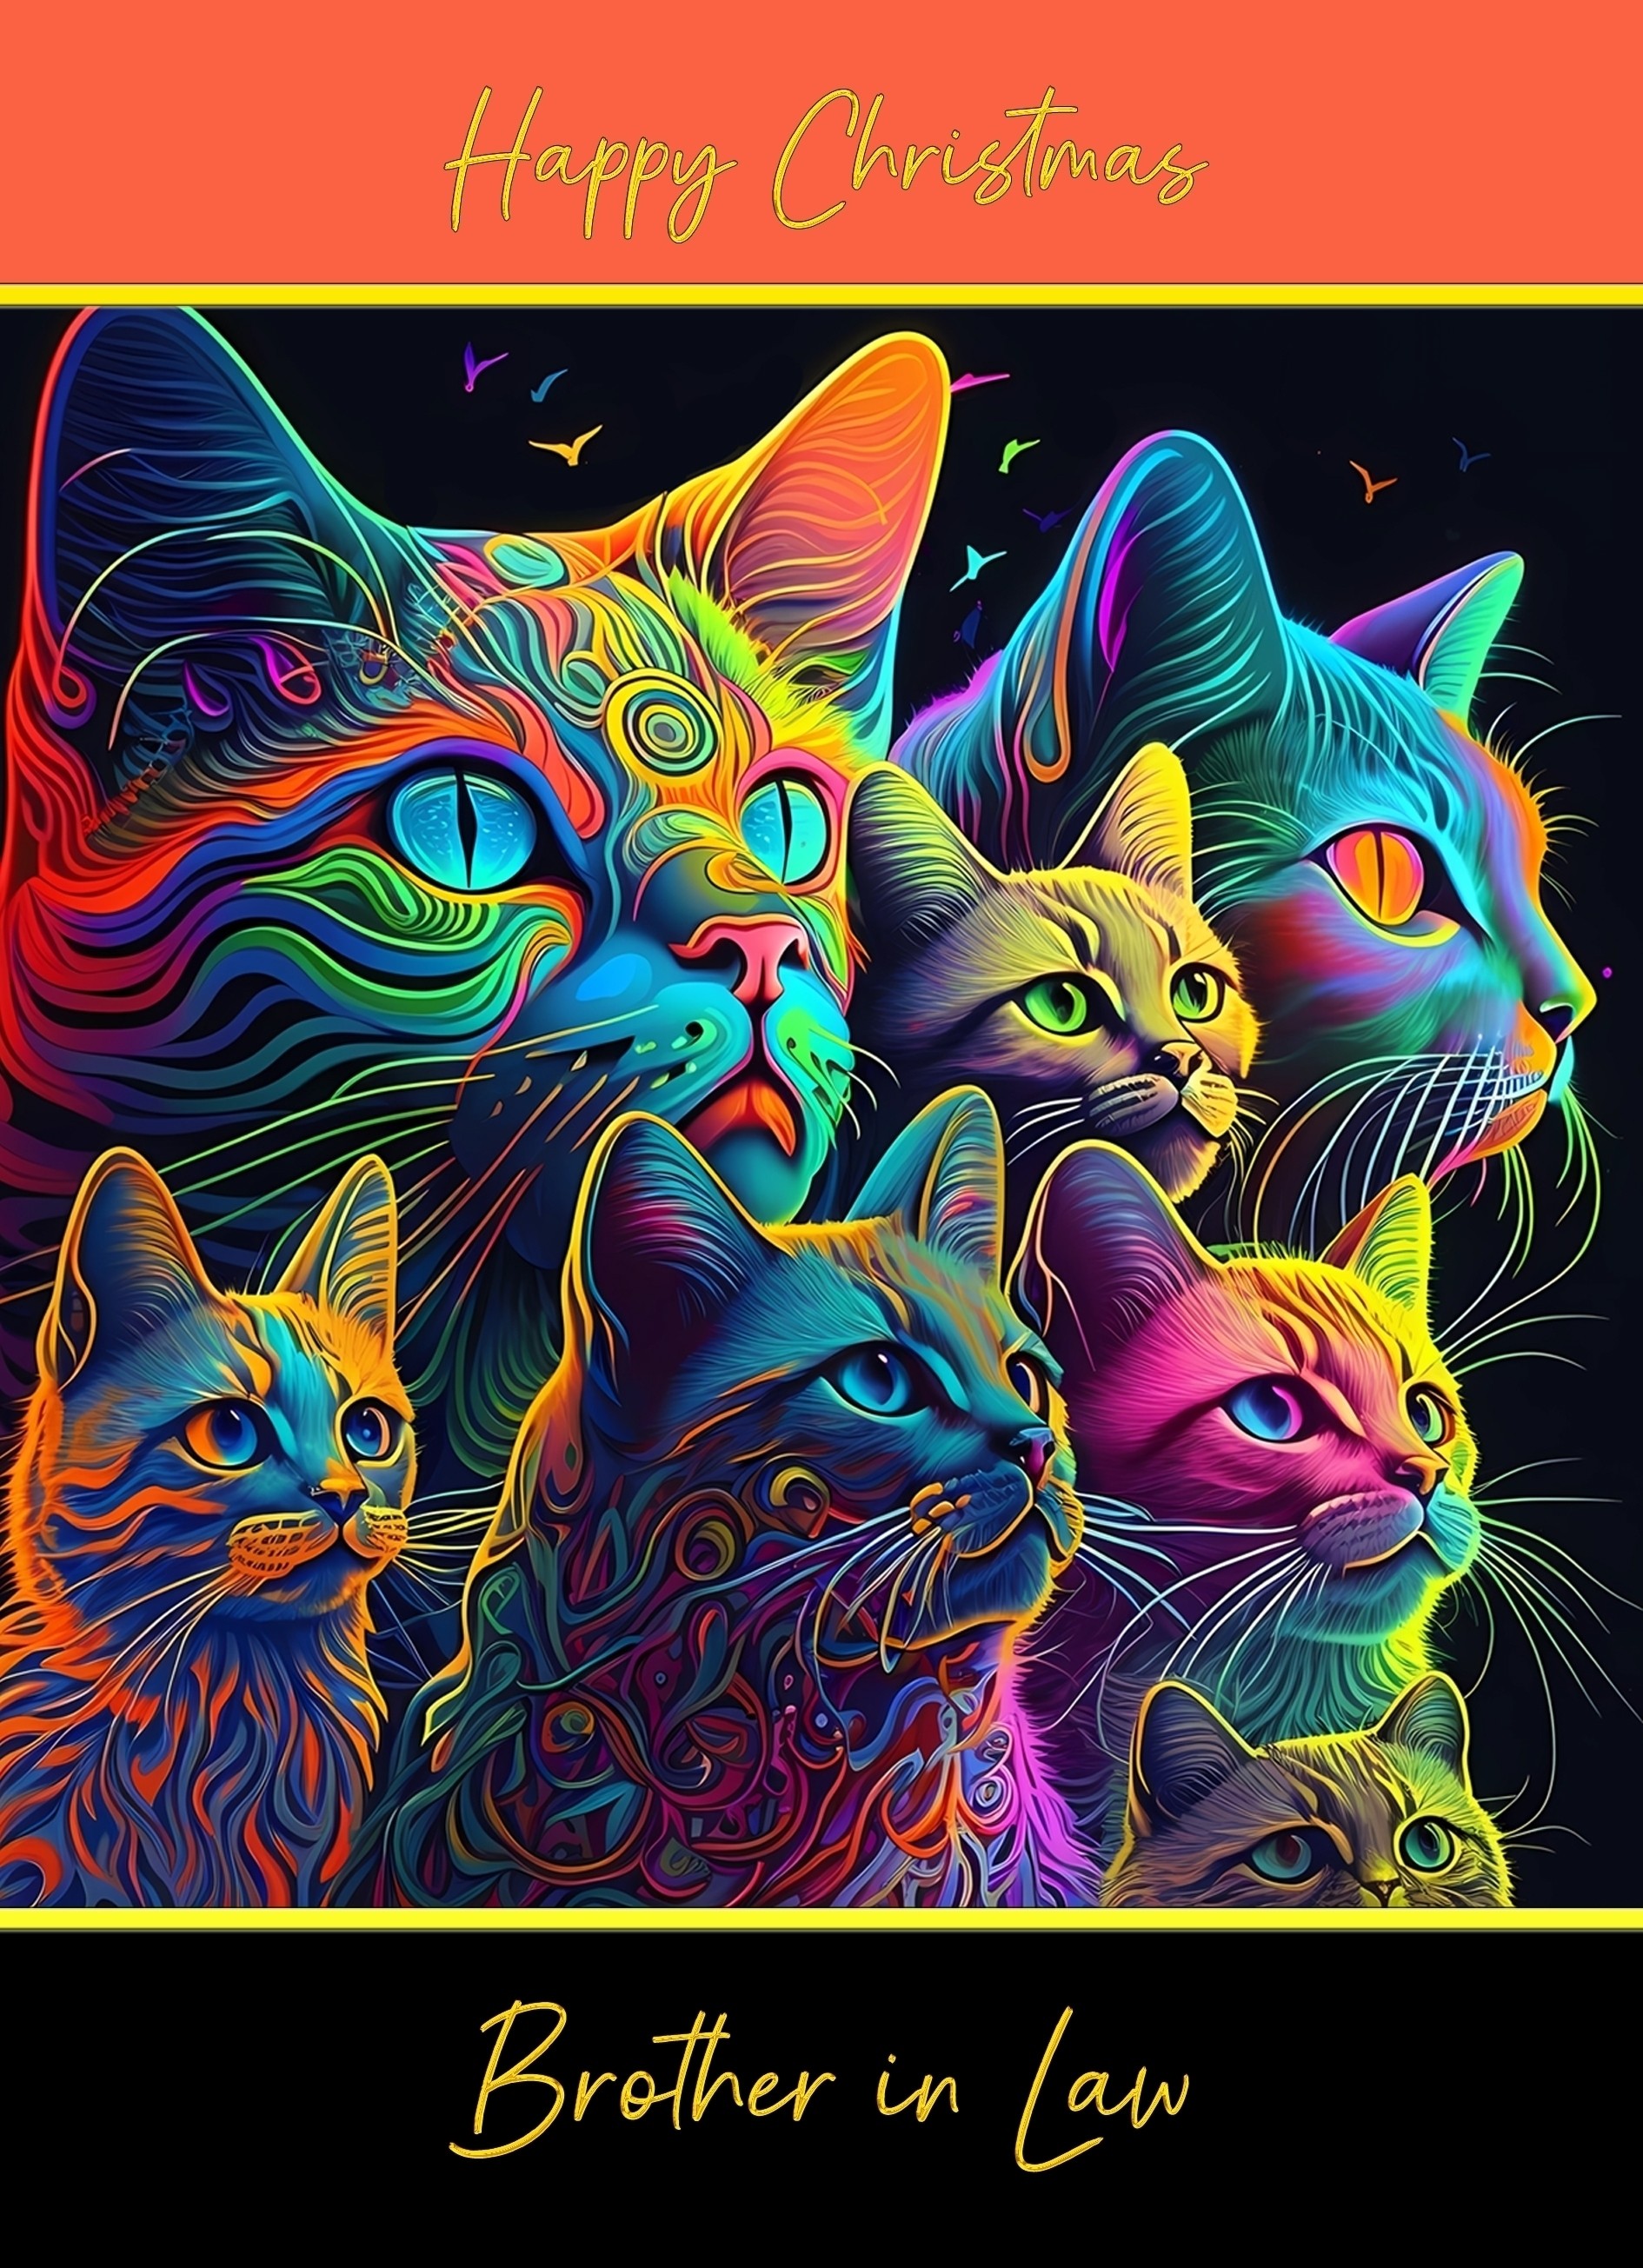 Christmas Card For Brother in Law (Colourful Cat Art, Design 2)